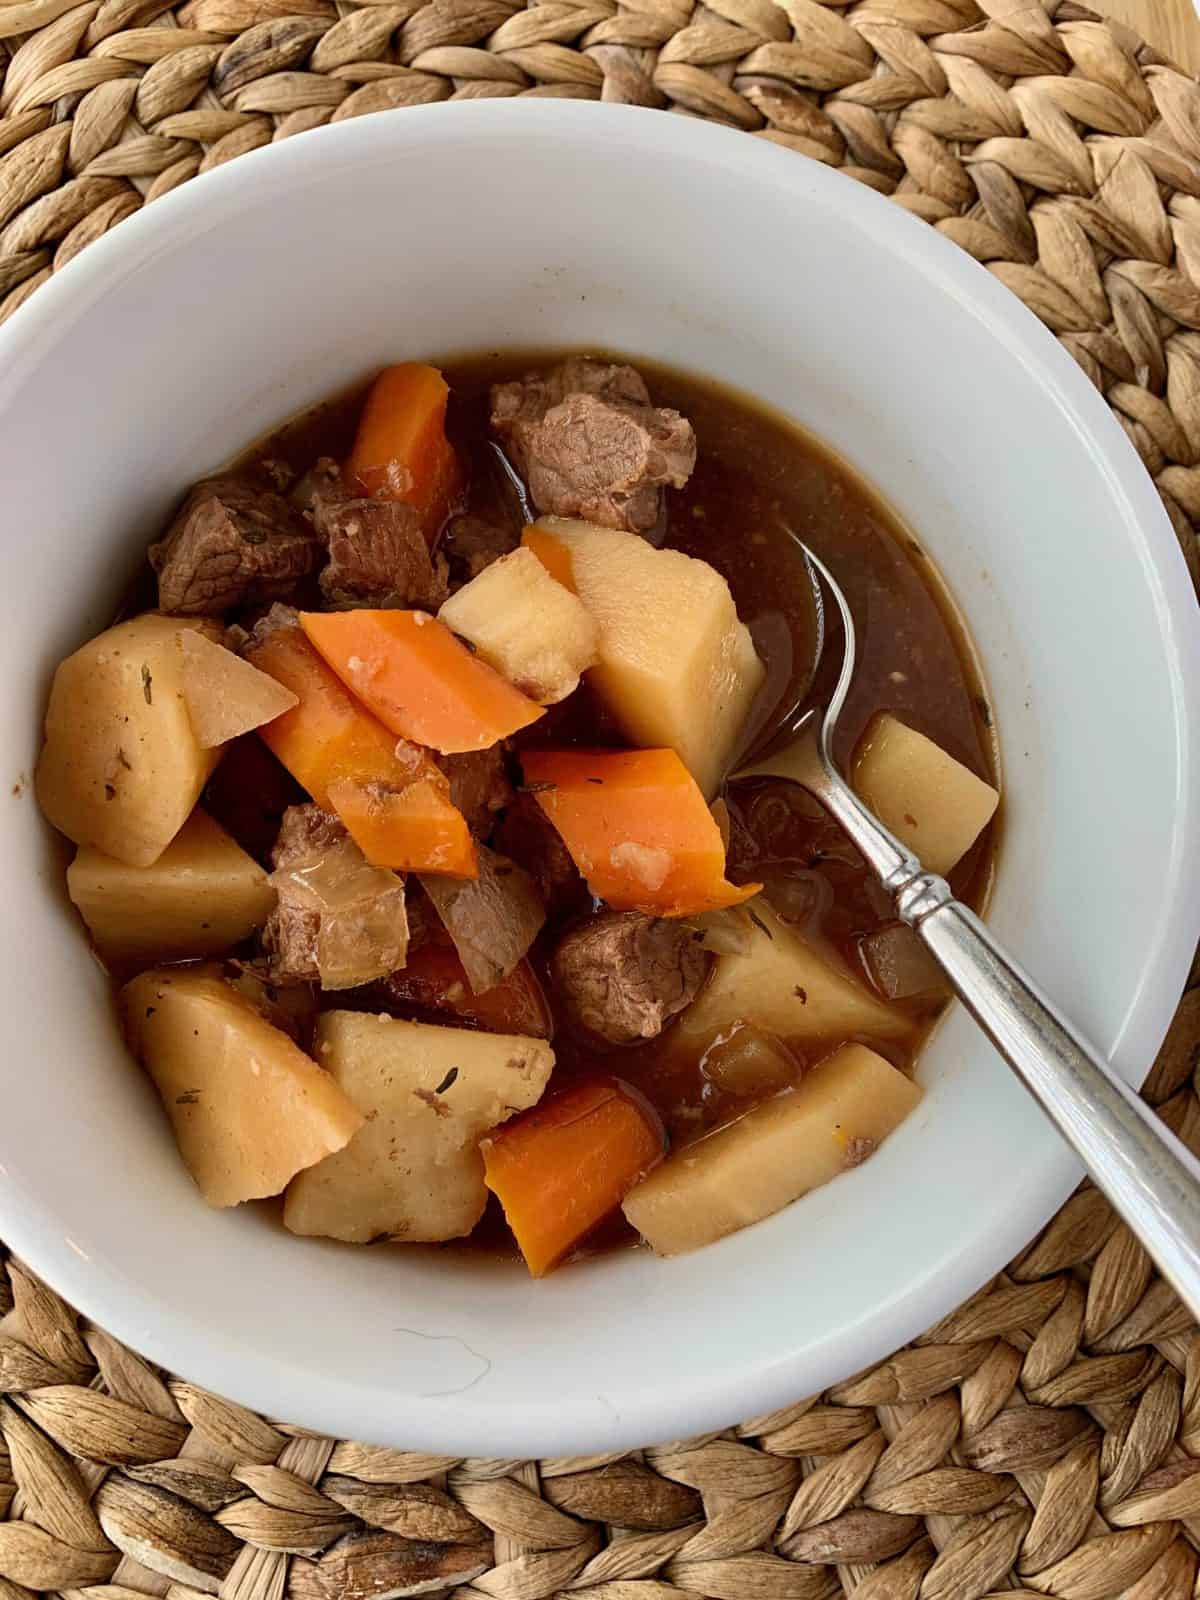 Irish stew in a small bowl with a spoon.